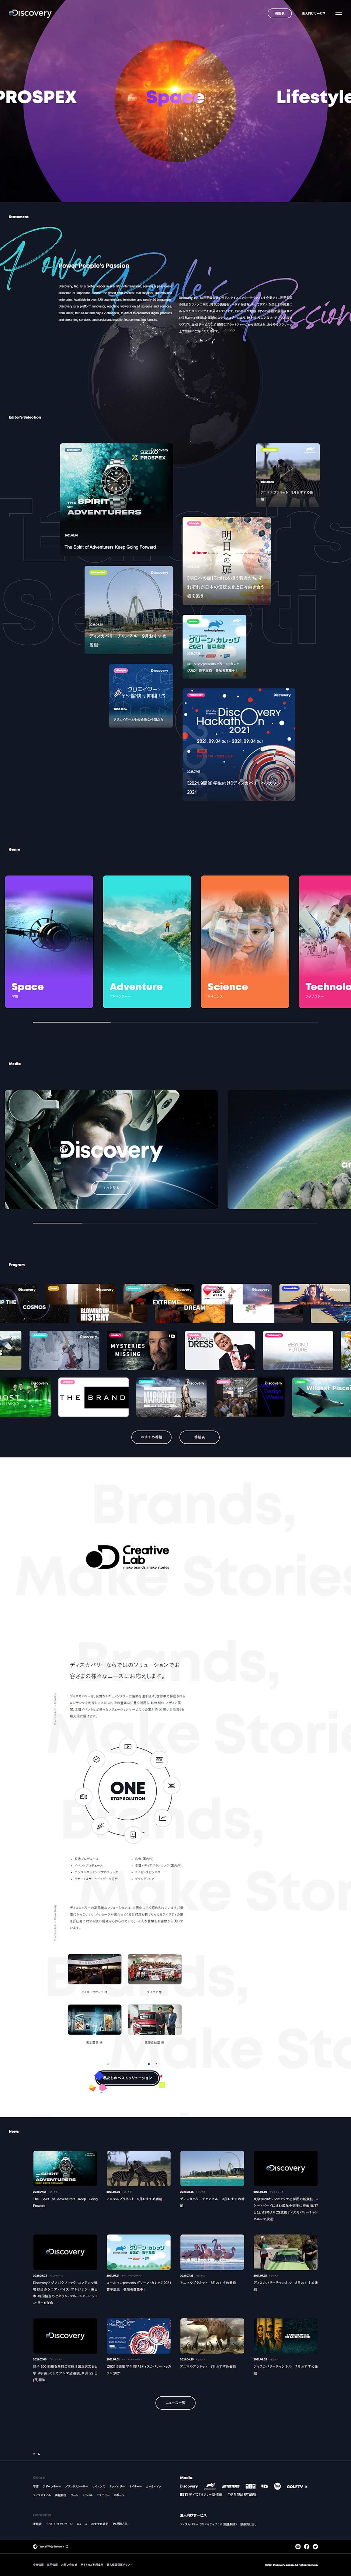 Discovery Japan_pc_1